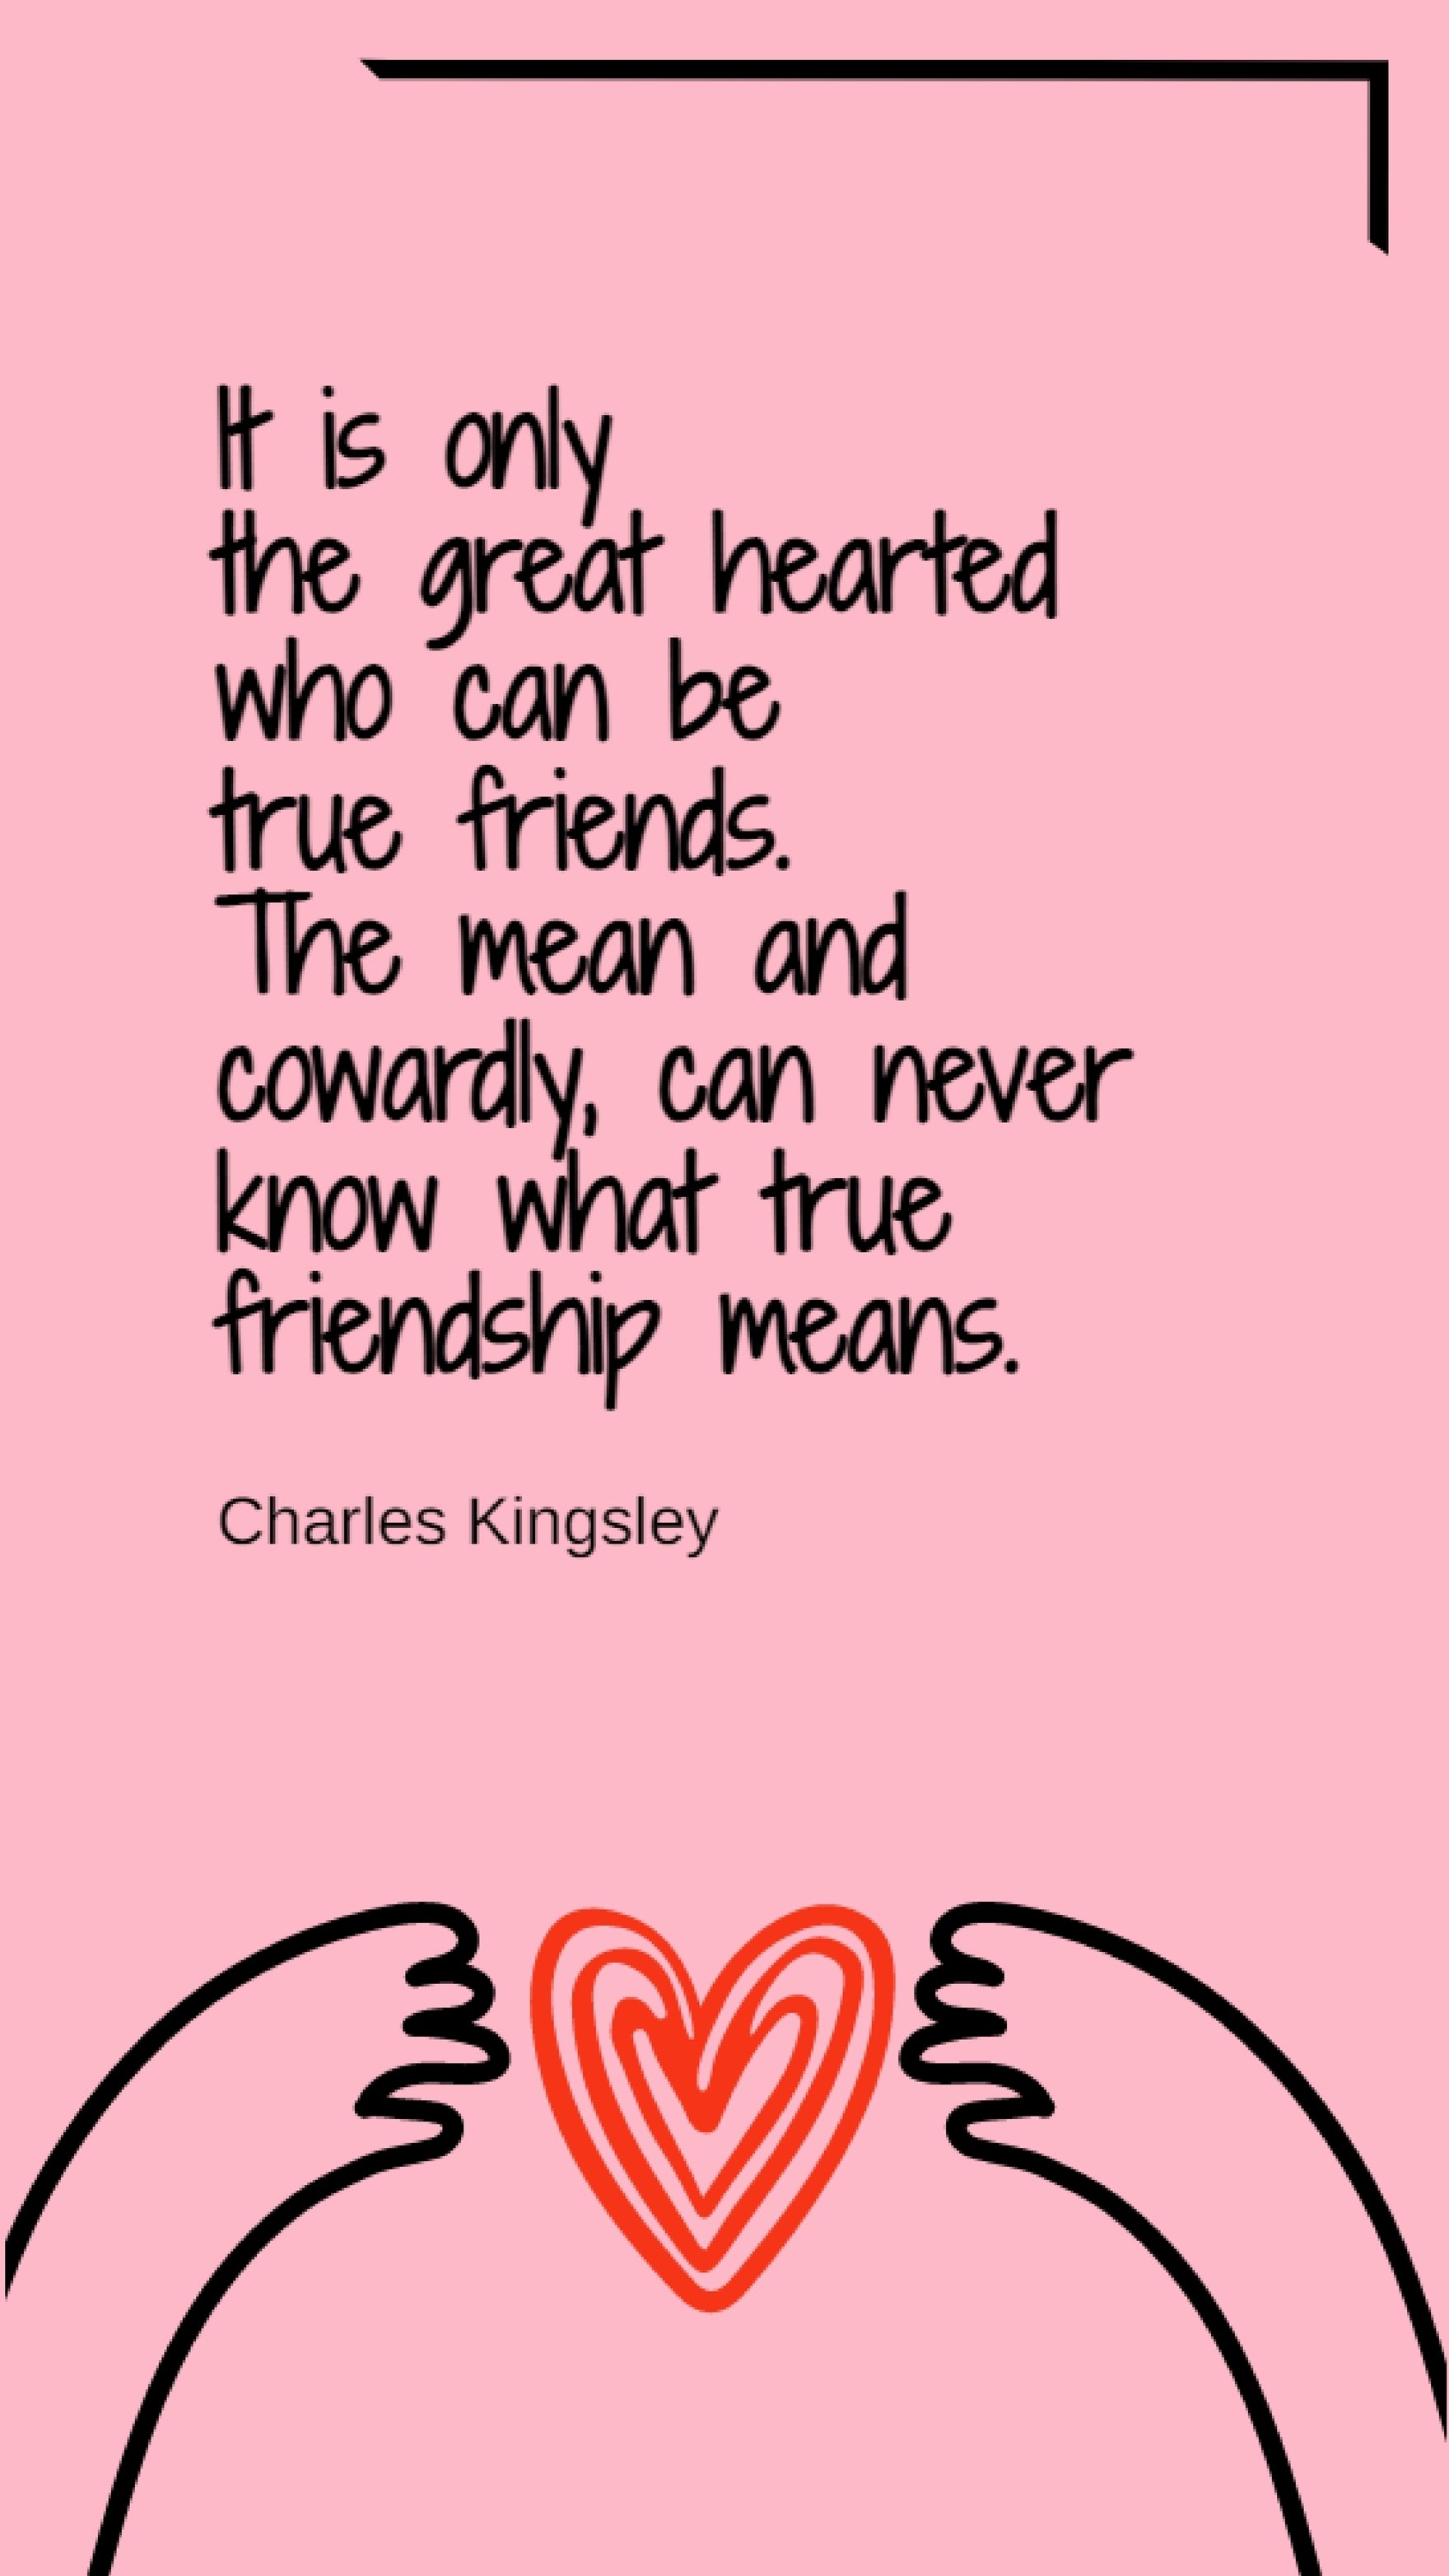 Charles Kingsley - It is only the great hearted who can be true friends. The mean and cowardly, can never know what true friendship means. Template